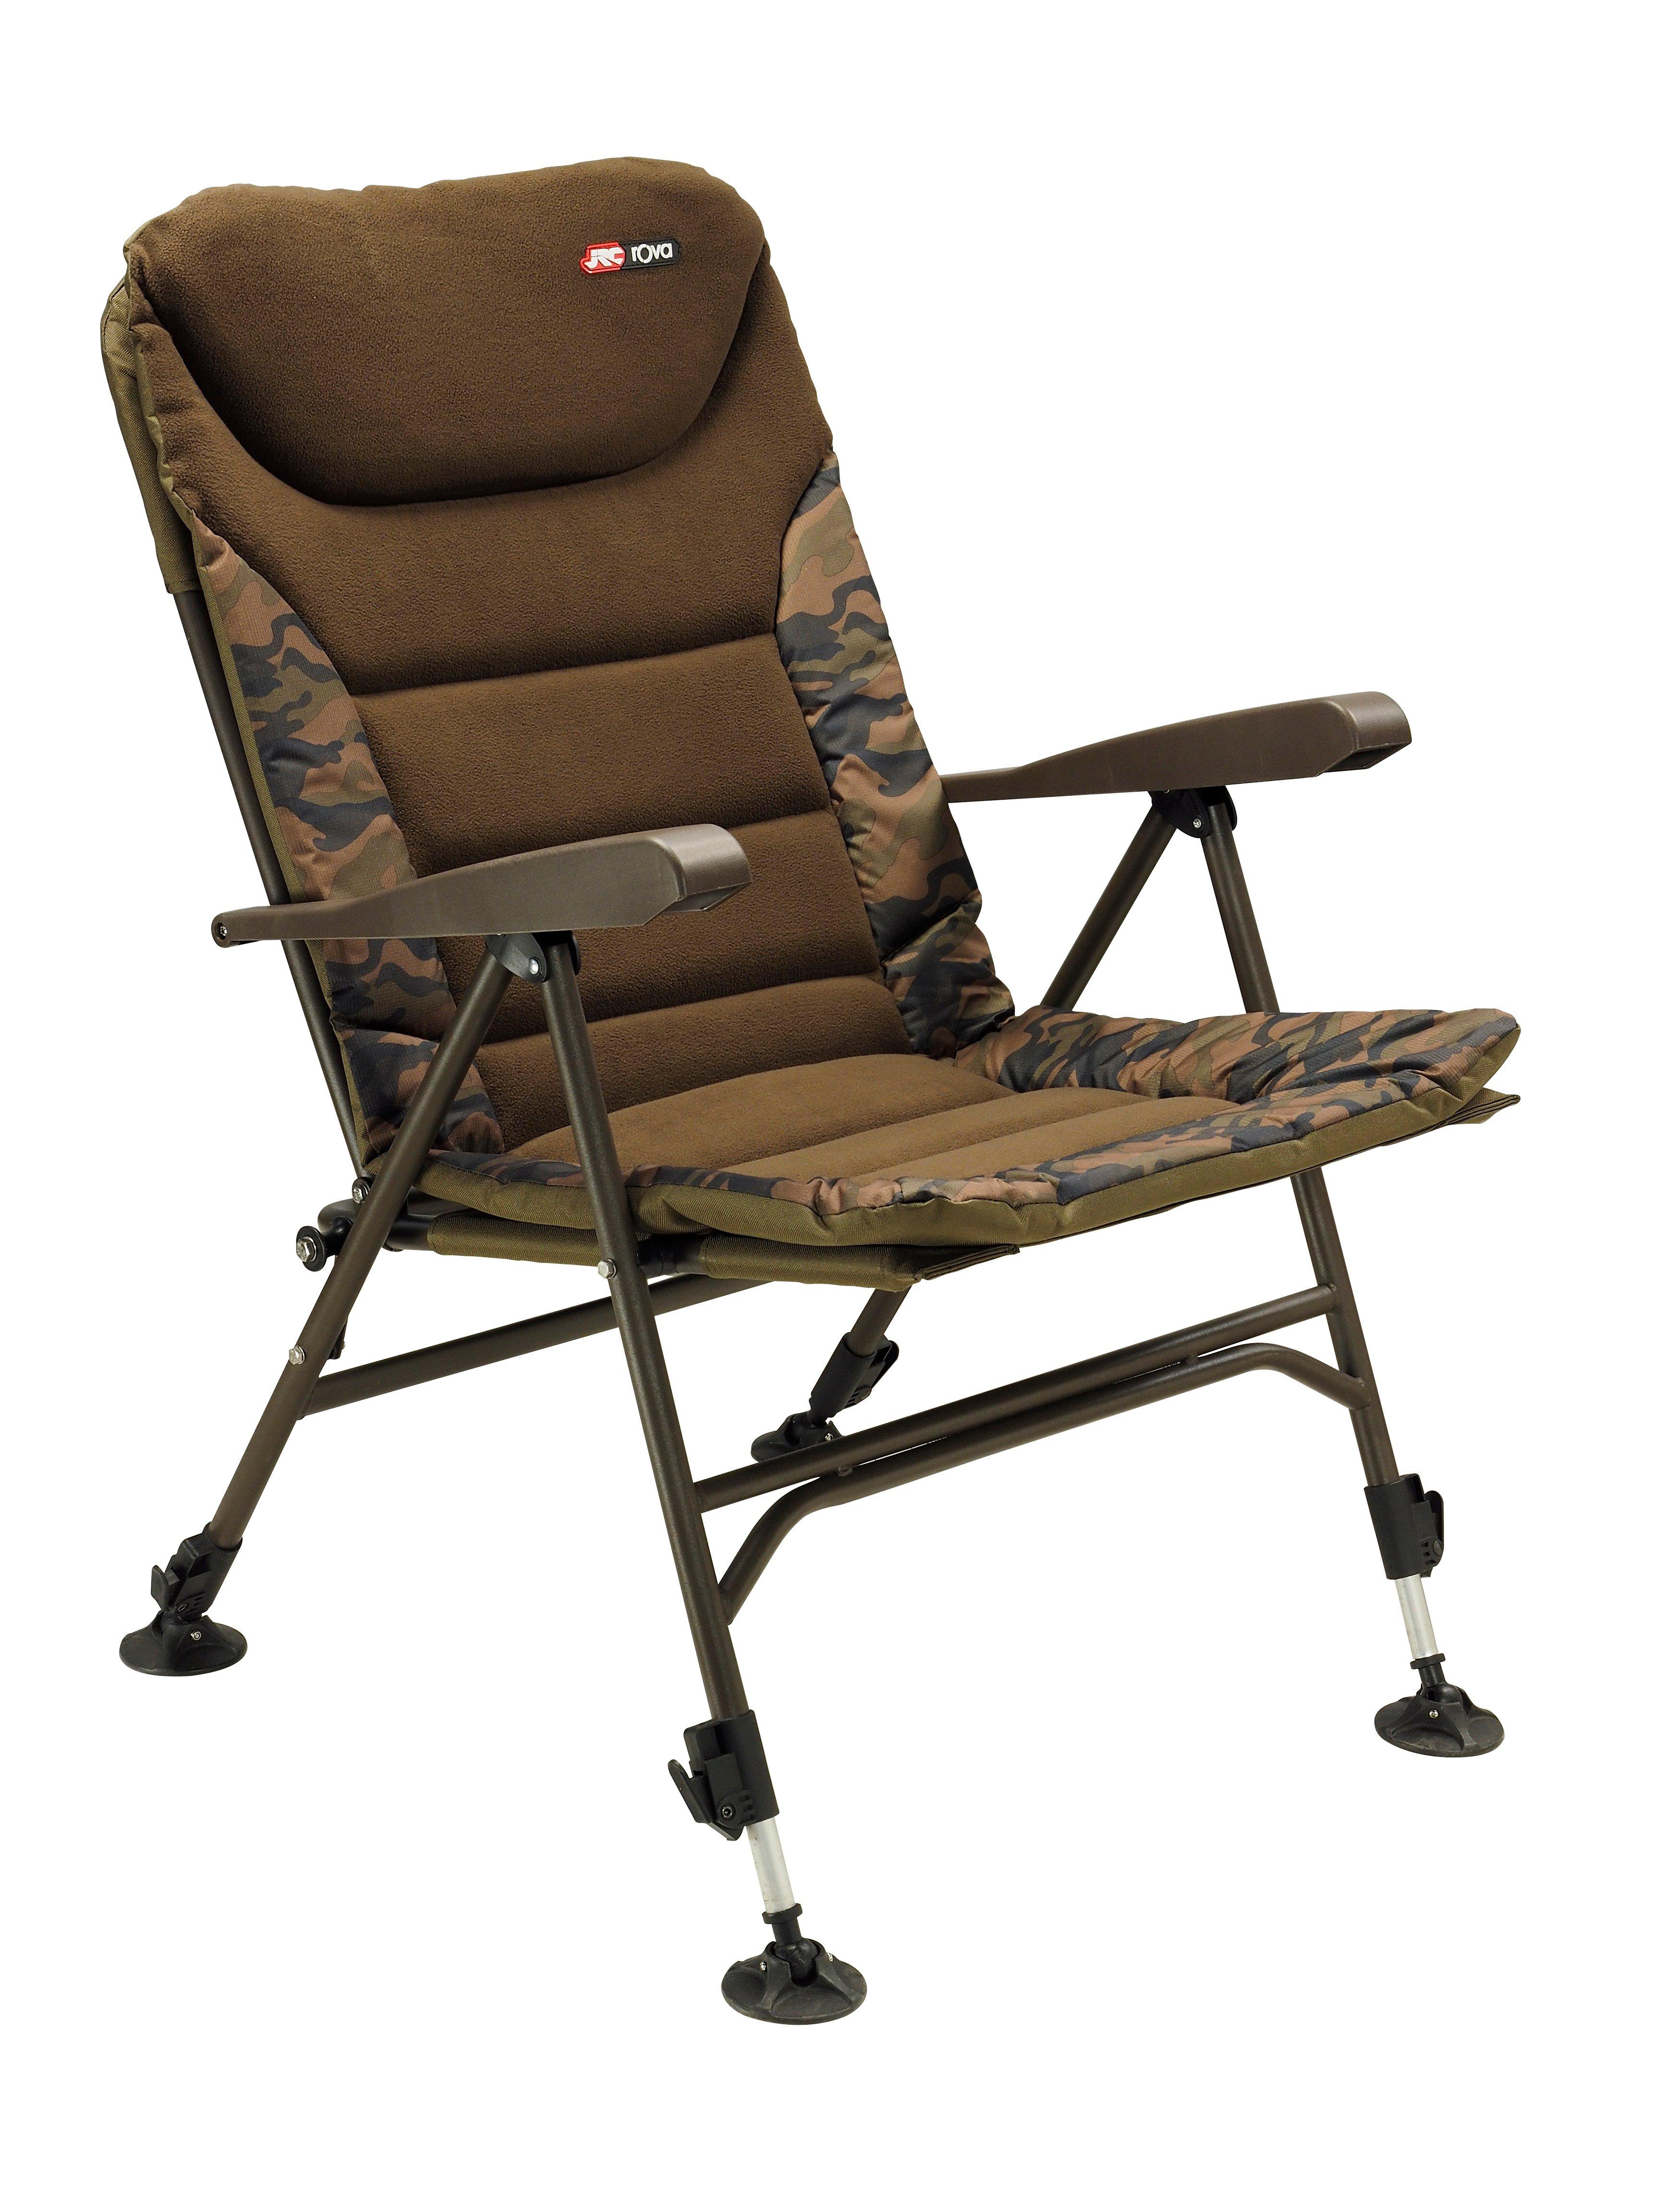 Carp FISHING CHAIRS Solid Steel Accessories Folding Armchair Folding Adjustable 